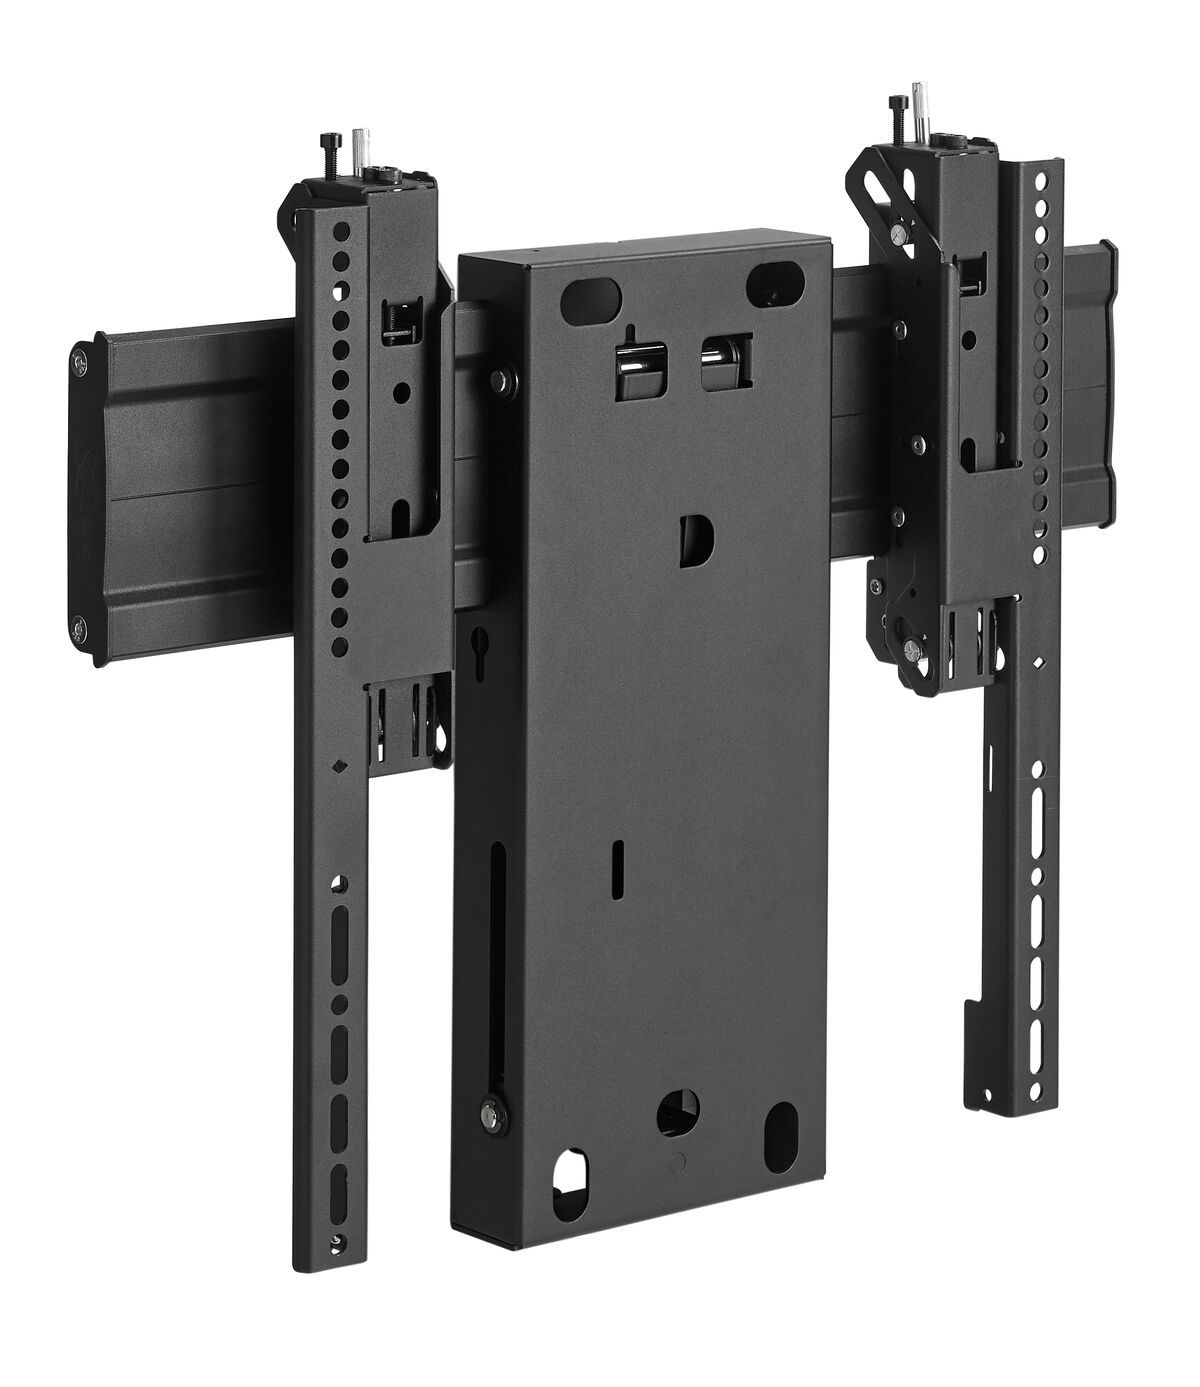 Vogel's Pop-out video wall mount Product